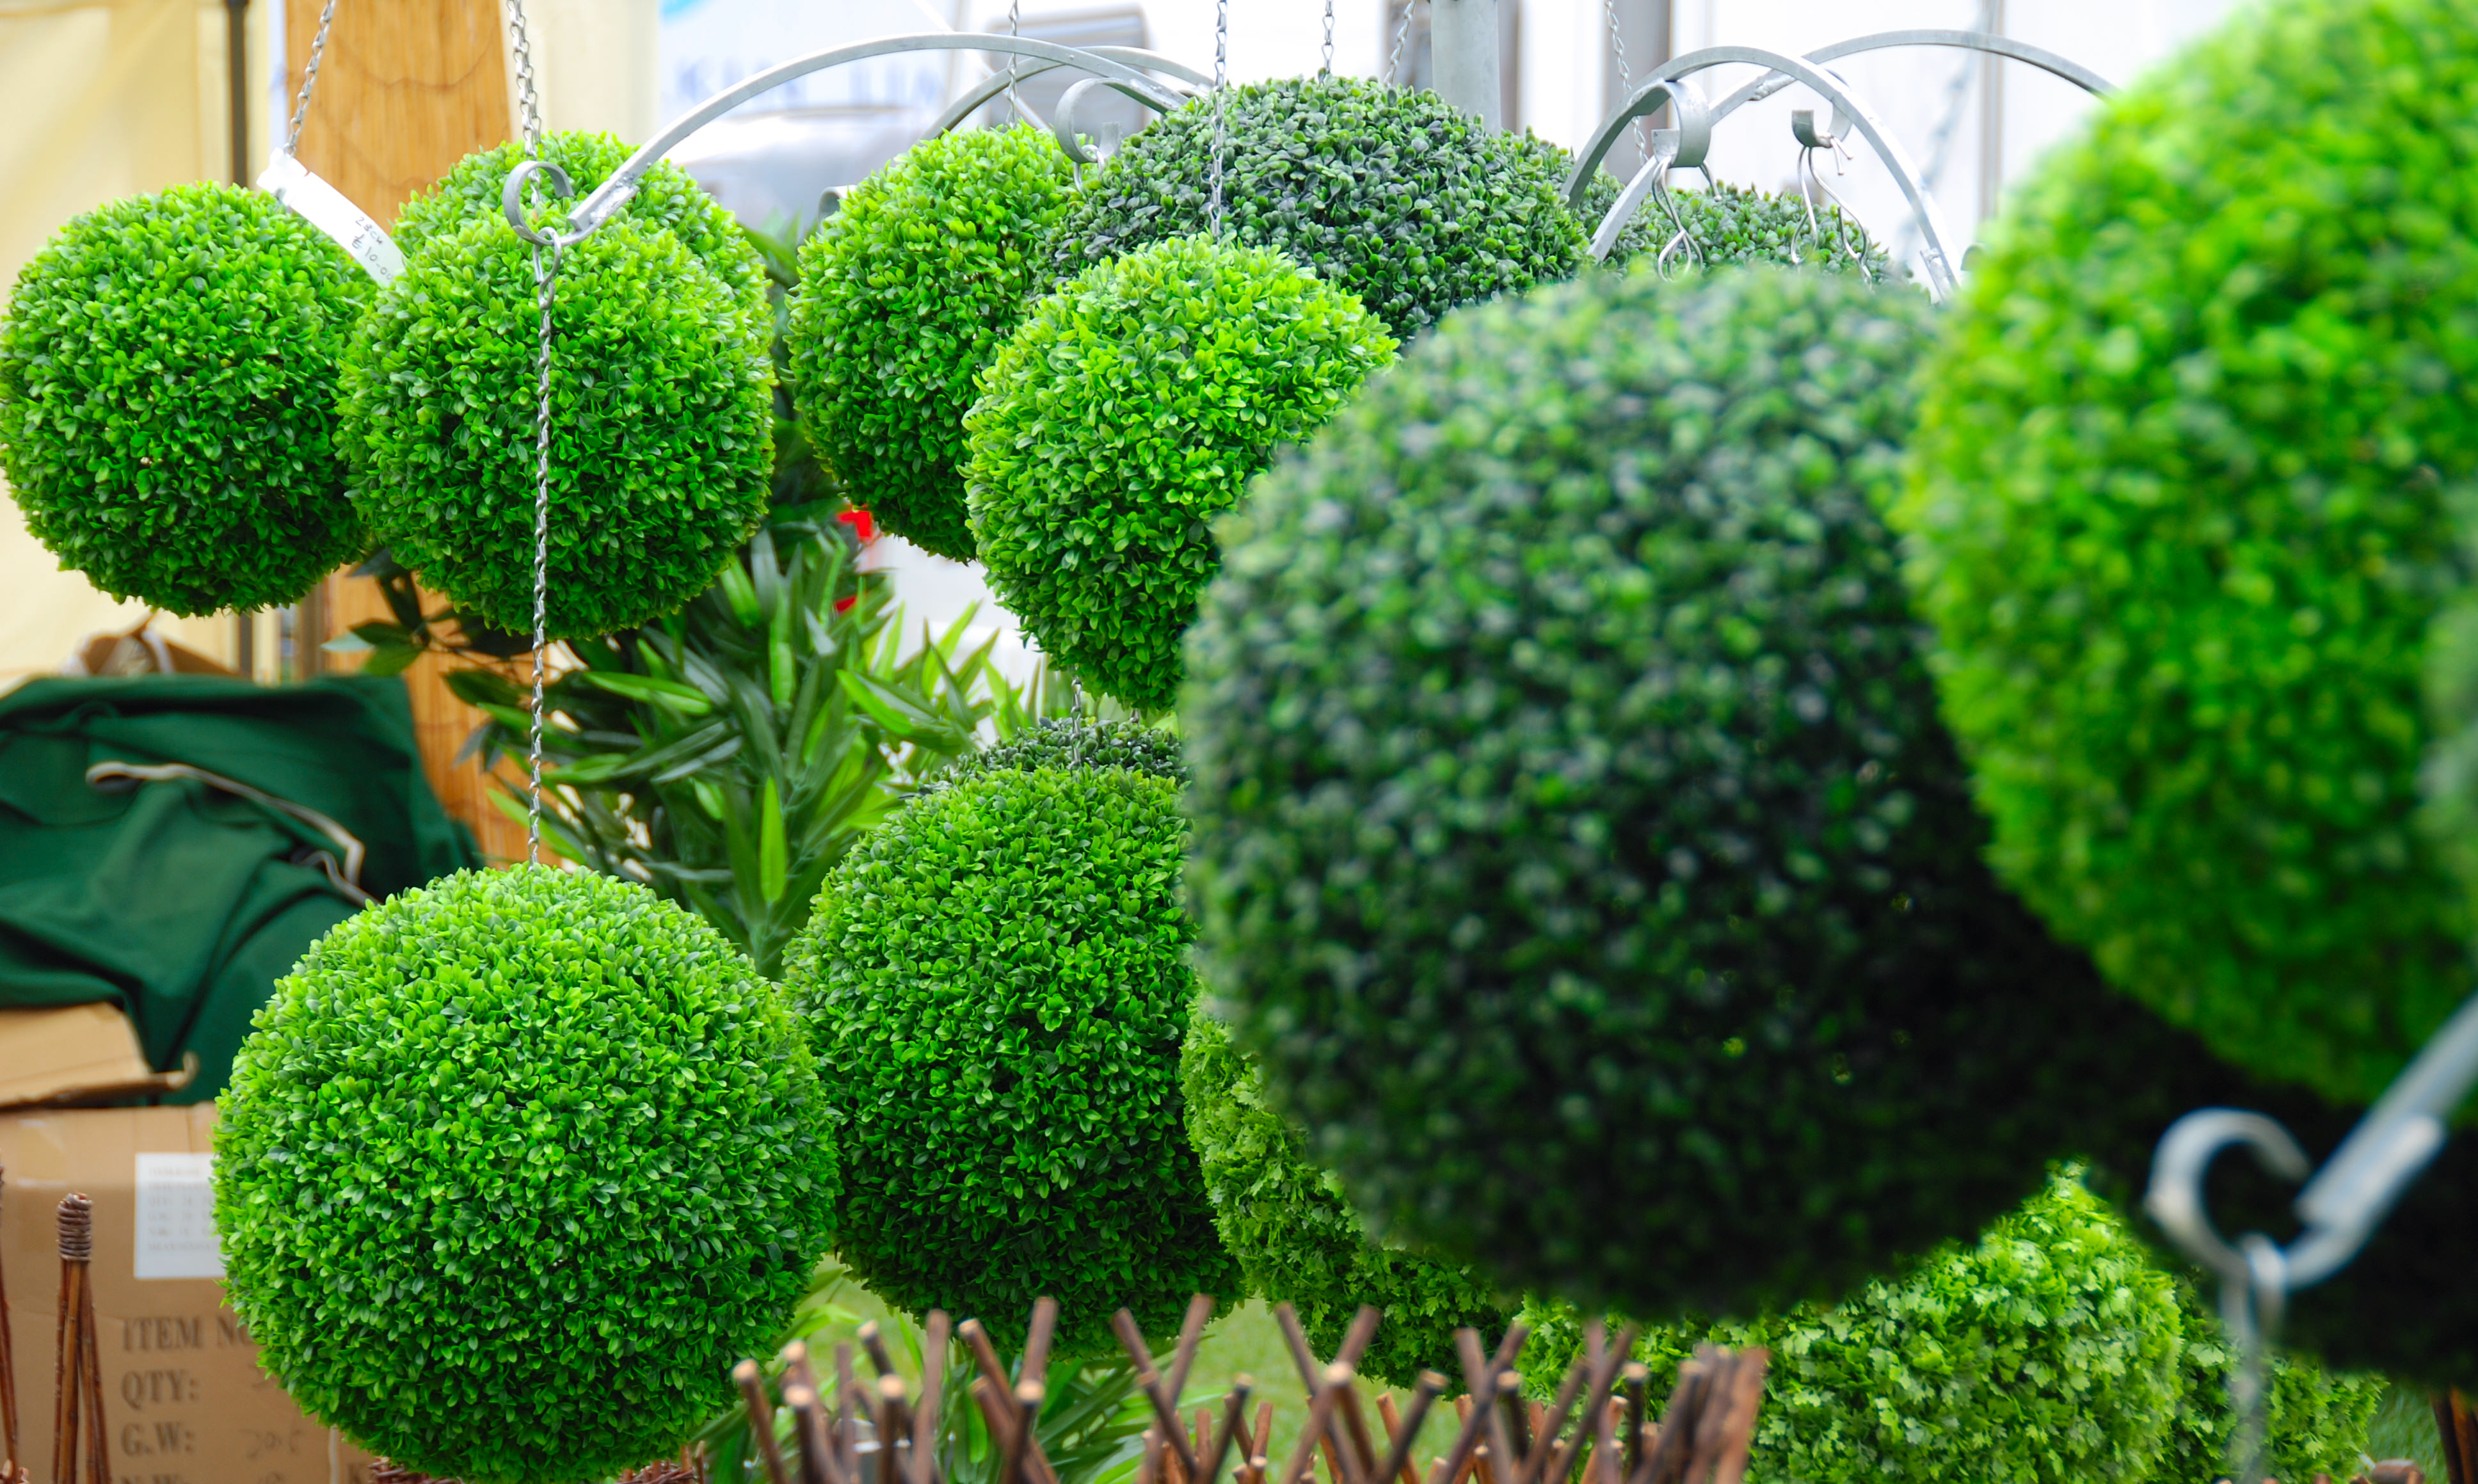 eco friendly green gardening garden seeing earth911 topiary shares